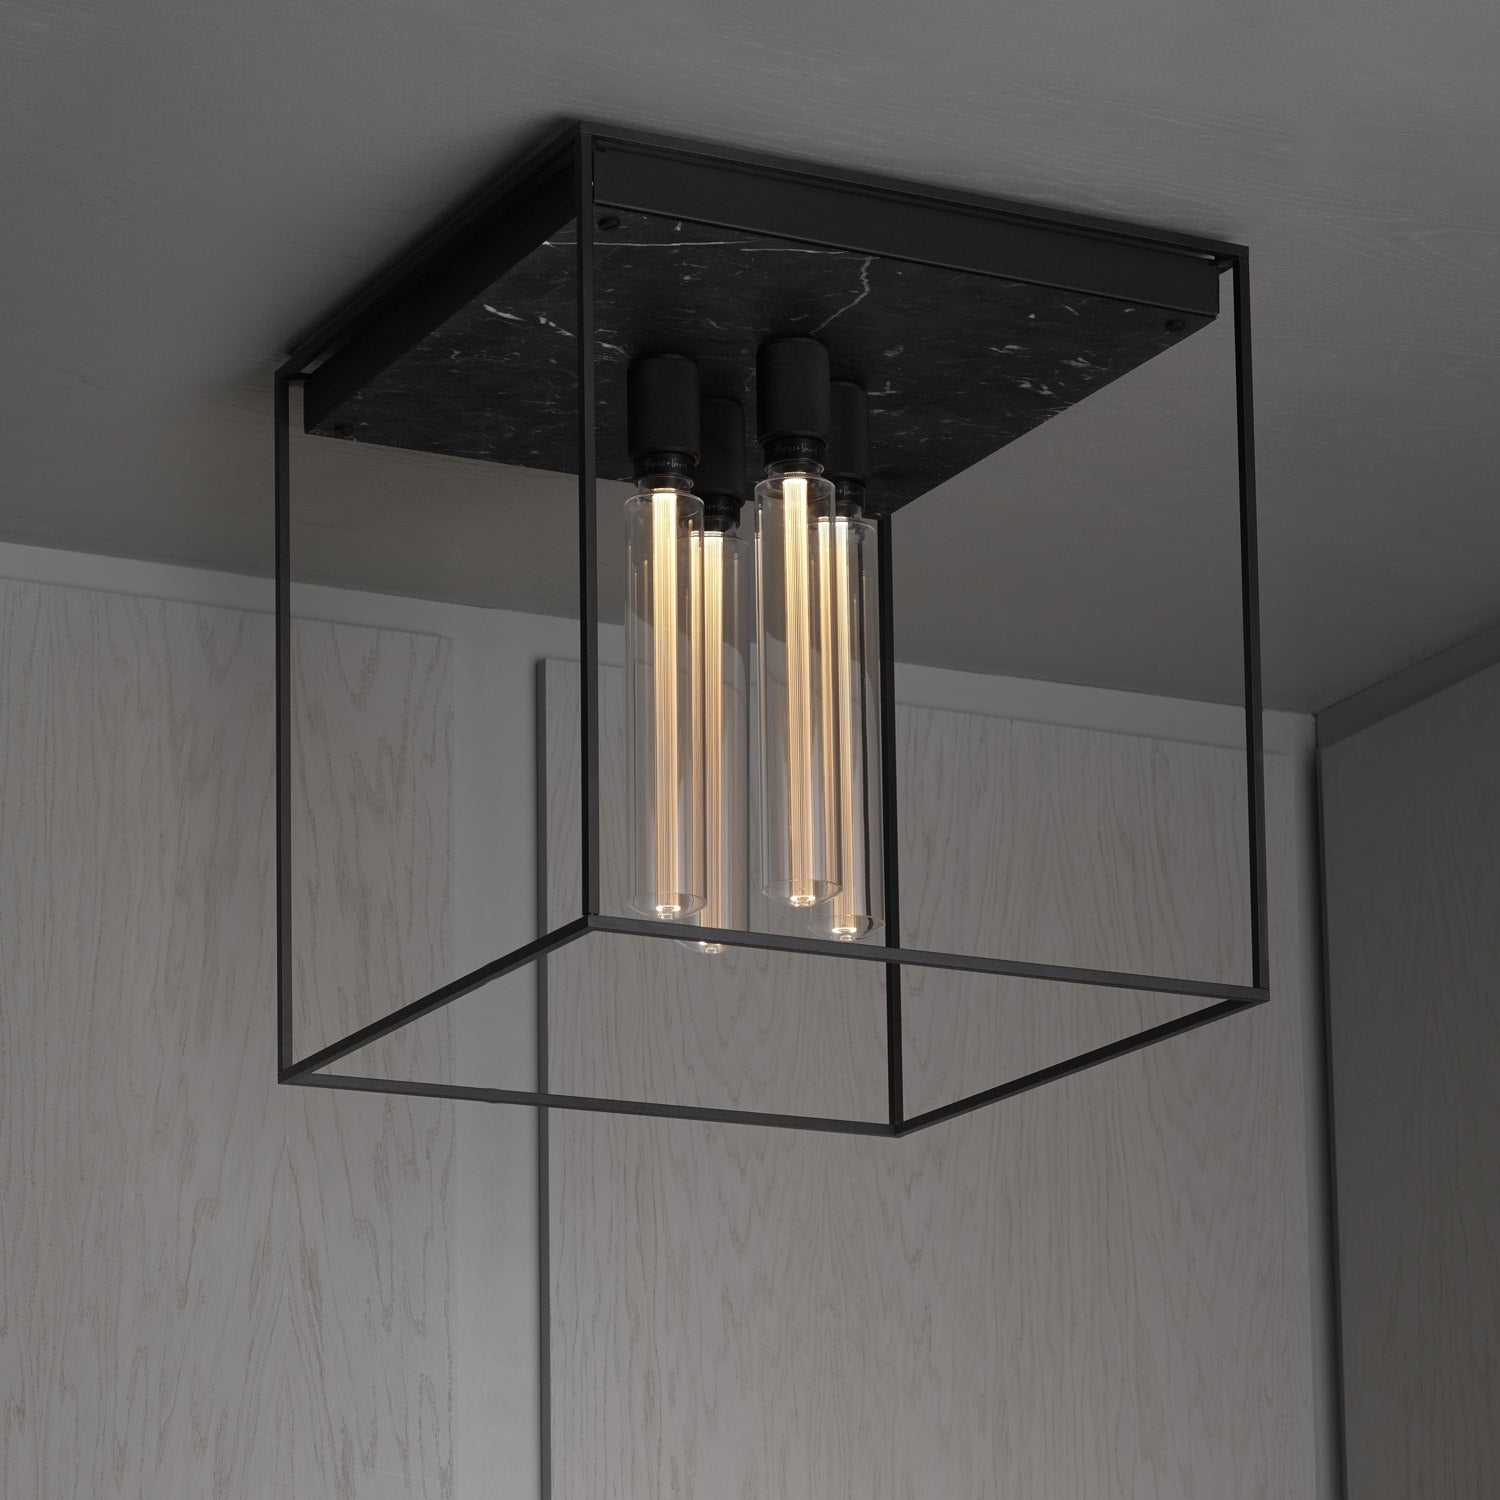 Buster + Punch Caged Ceiling 4.0 Flush Mount Ceiling Light Buster + Punch Black Marble  